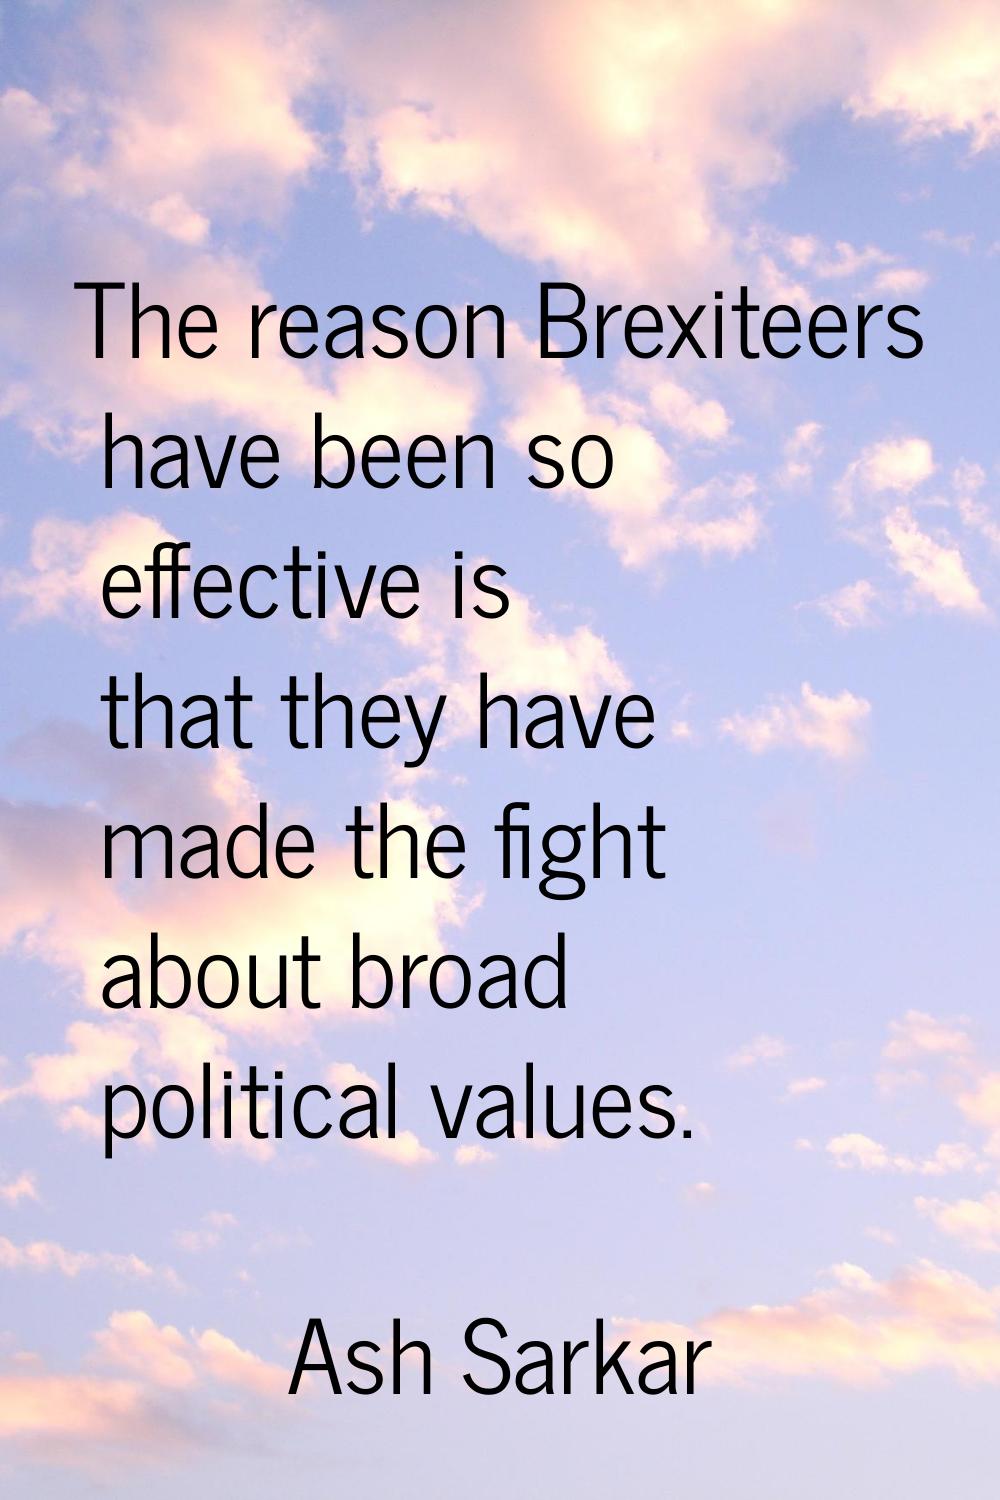 The reason Brexiteers have been so effective is that they have made the fight about broad political